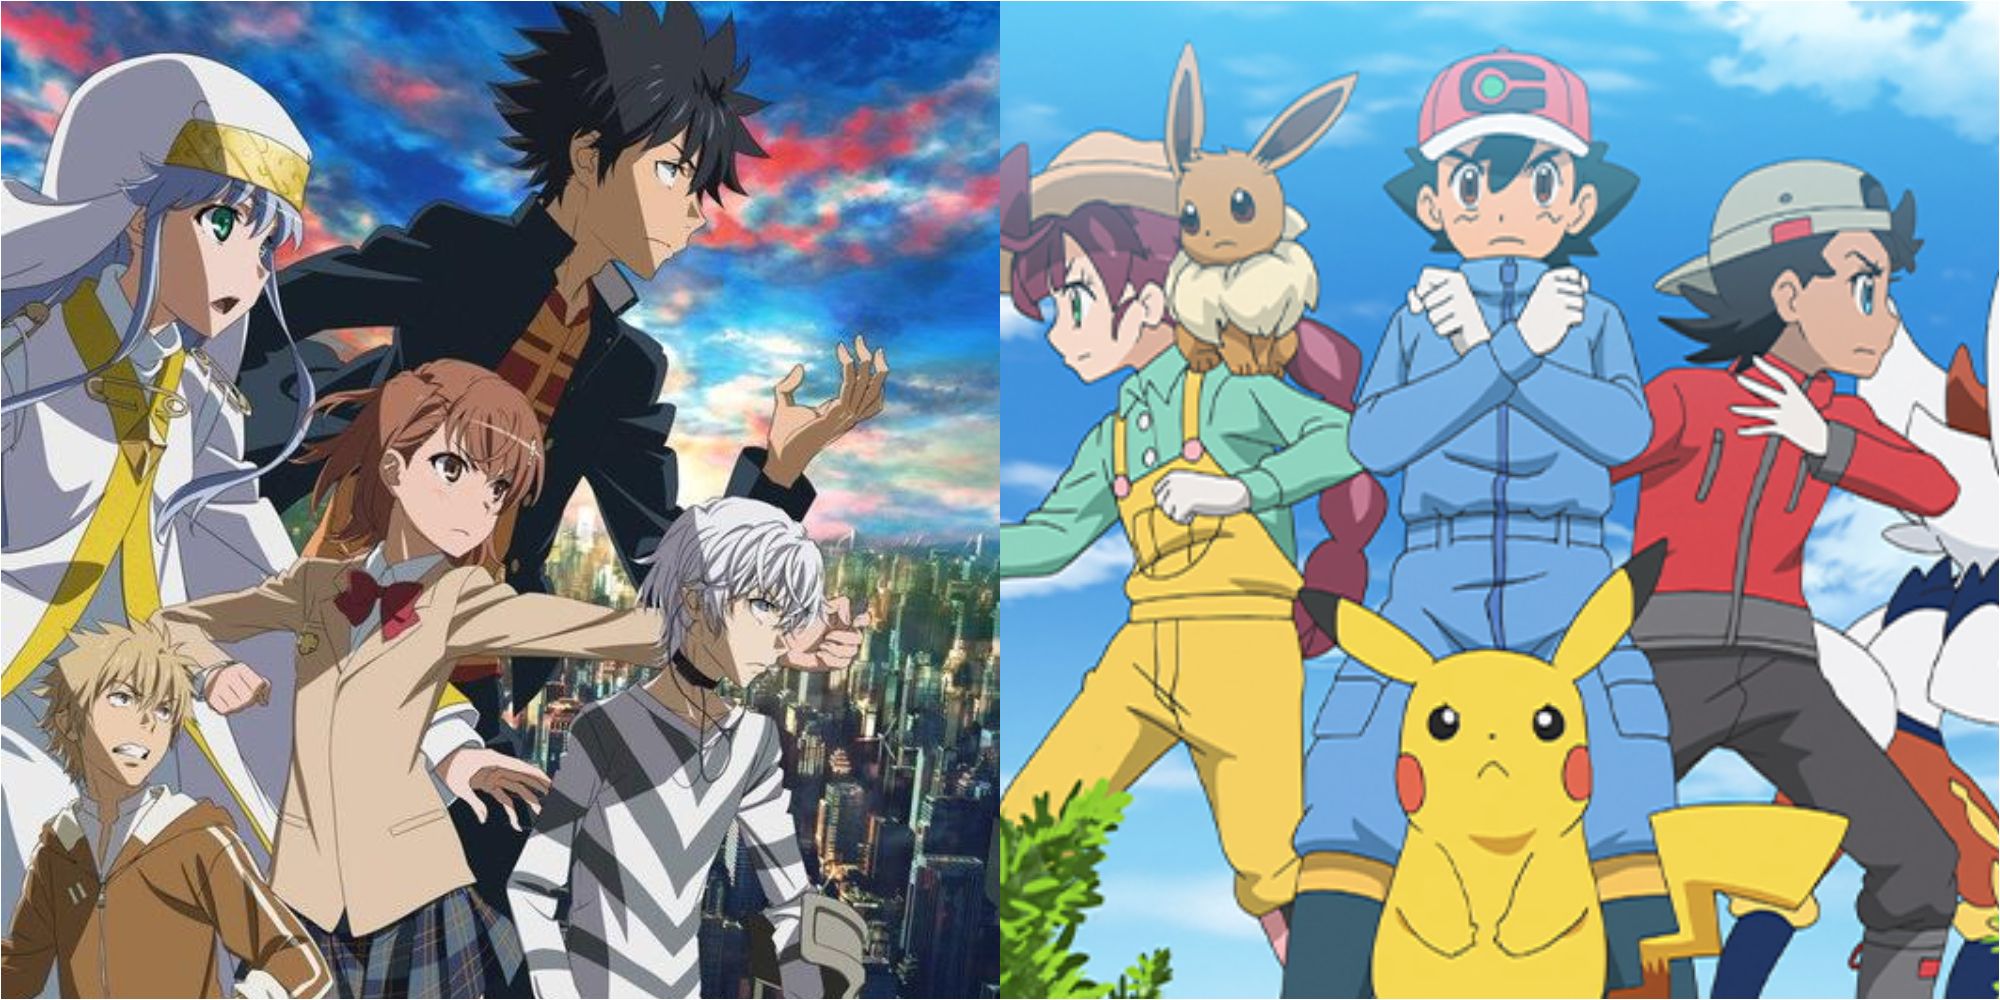 Split image showing characters from the Toaru Majutsu No Index and Pokémon anime